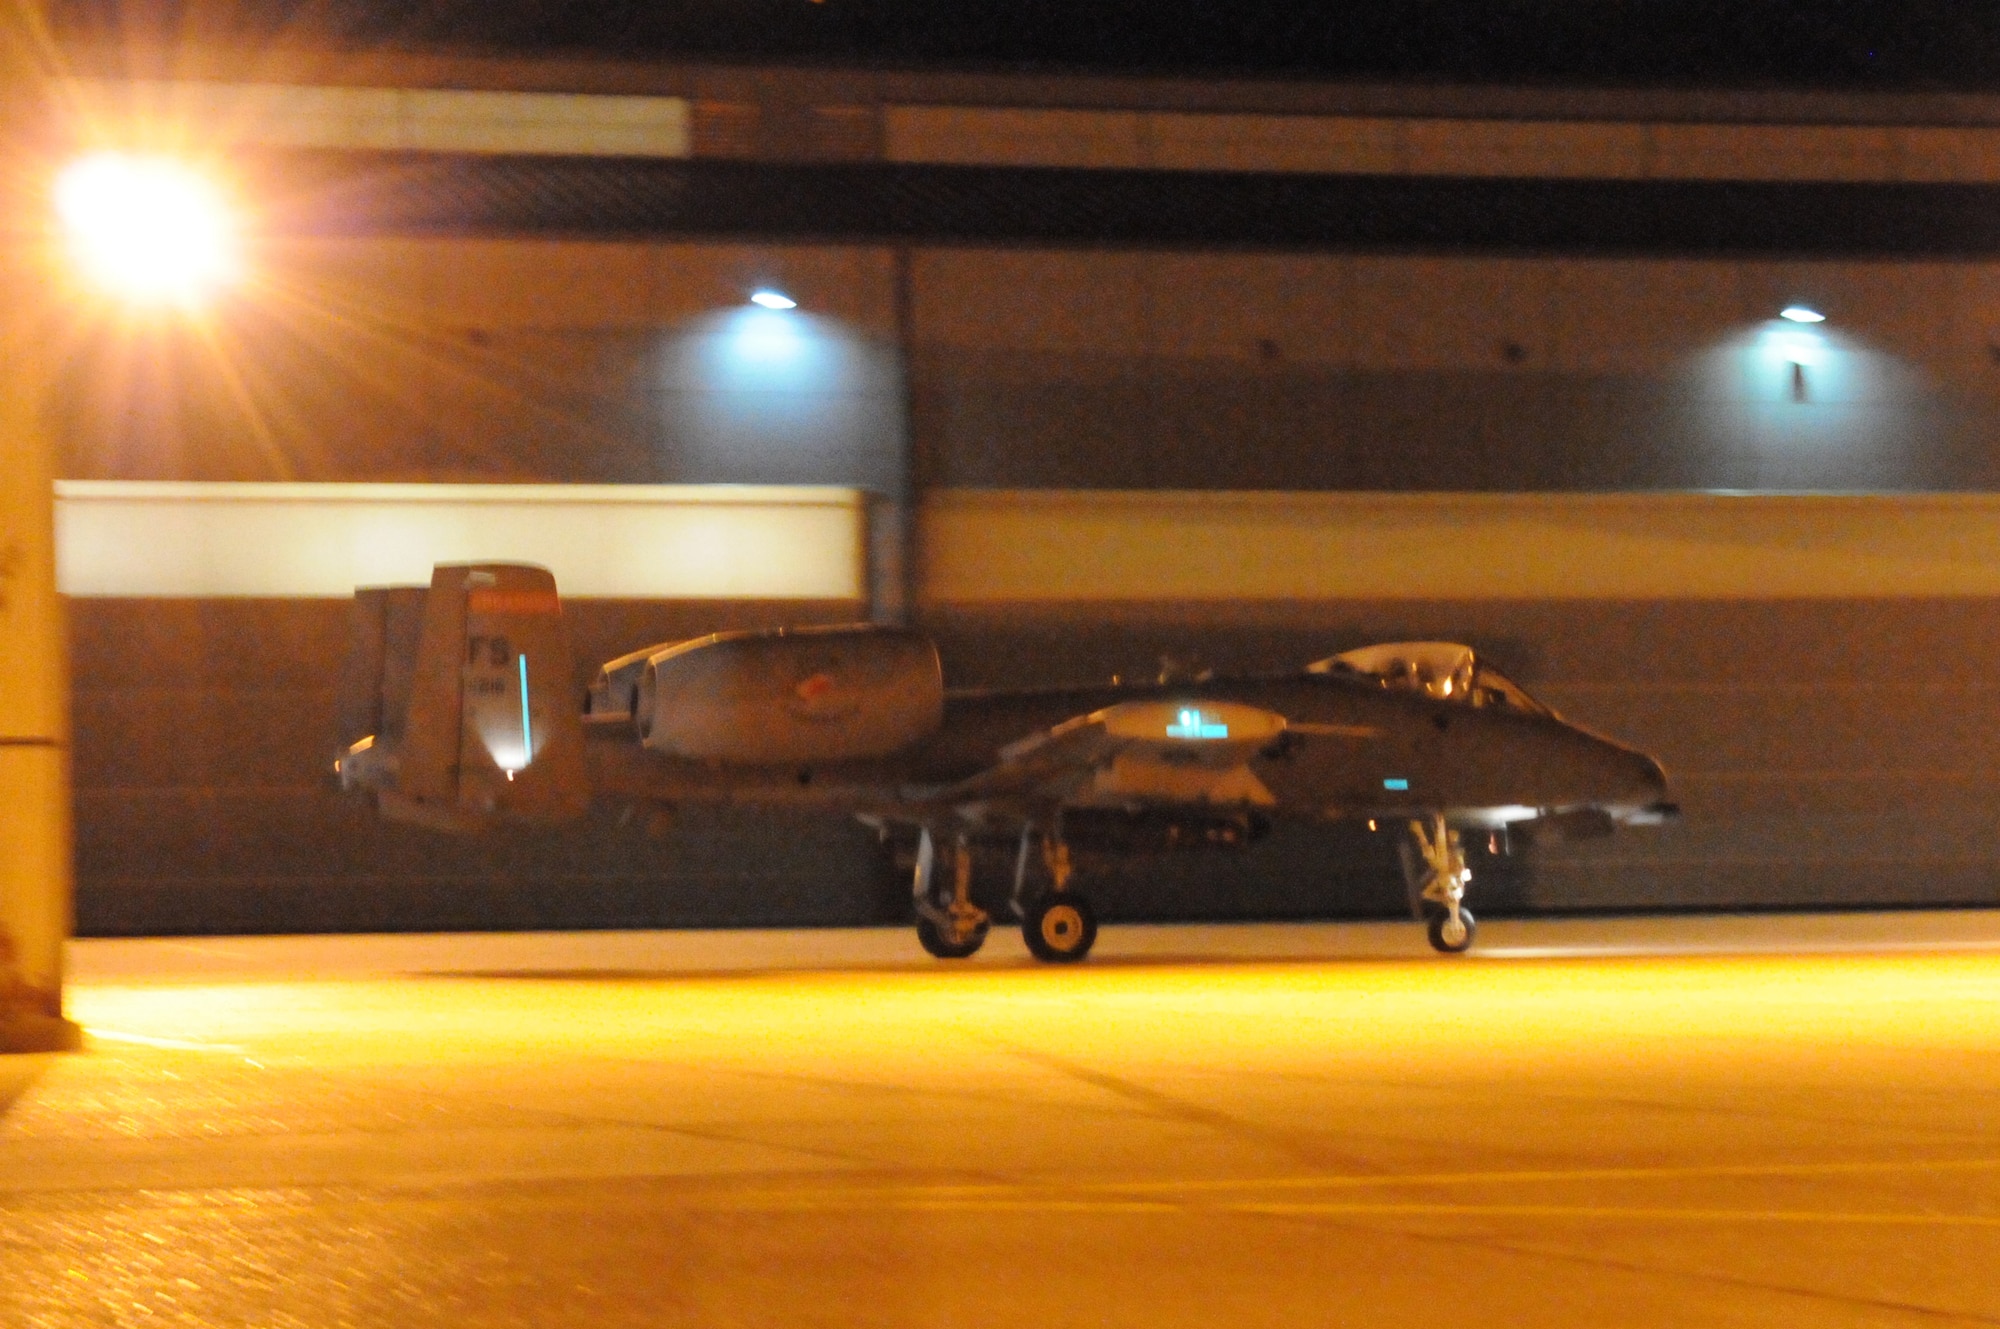 Tail No. 216 taxies on the ramp at the 188th Fighter Wing’s Ebbing Air National Guard Base in Fort Smith, Ark., Jan. 29, 2014. Maj. Patric Coggin (188) and Lt. Col. Toby Brallier (216) conducted the final night-flying mission for the 188th. The two pilots conducted a flight lead upgrade certification near Whiteman Air Force Base, Mo., before returning to the 188th’s Detachment 1 Razorback Range at Fort Chaffee Maneuver Training Center, Ark., to log additional close-air support training.  The wing is currently transitioning from a fighter mission to an Intelligence, Surveillance and Reconnaissance/remotely piloted aircraft (MQ-9 Reaper) mission that will also feature a space-focused targeting squadron. The 188th has divested two A-10C Thunderbolt II “Warthogs” per month since September 2013. The last two Warthogs are slated to leave the 188th in June 2014. The 188th has flown A-10s since April 2007 and has had assigned aircraft on site since 1953. June will mark the first time in the unit’s 60-year history that no assigned military aircraft will be parked on the flightline at Ebbing Air National Guard Base, Fort Smith, Ark. (U.S. Air National Guard photo by Tech Sgt. Josh Lewis)